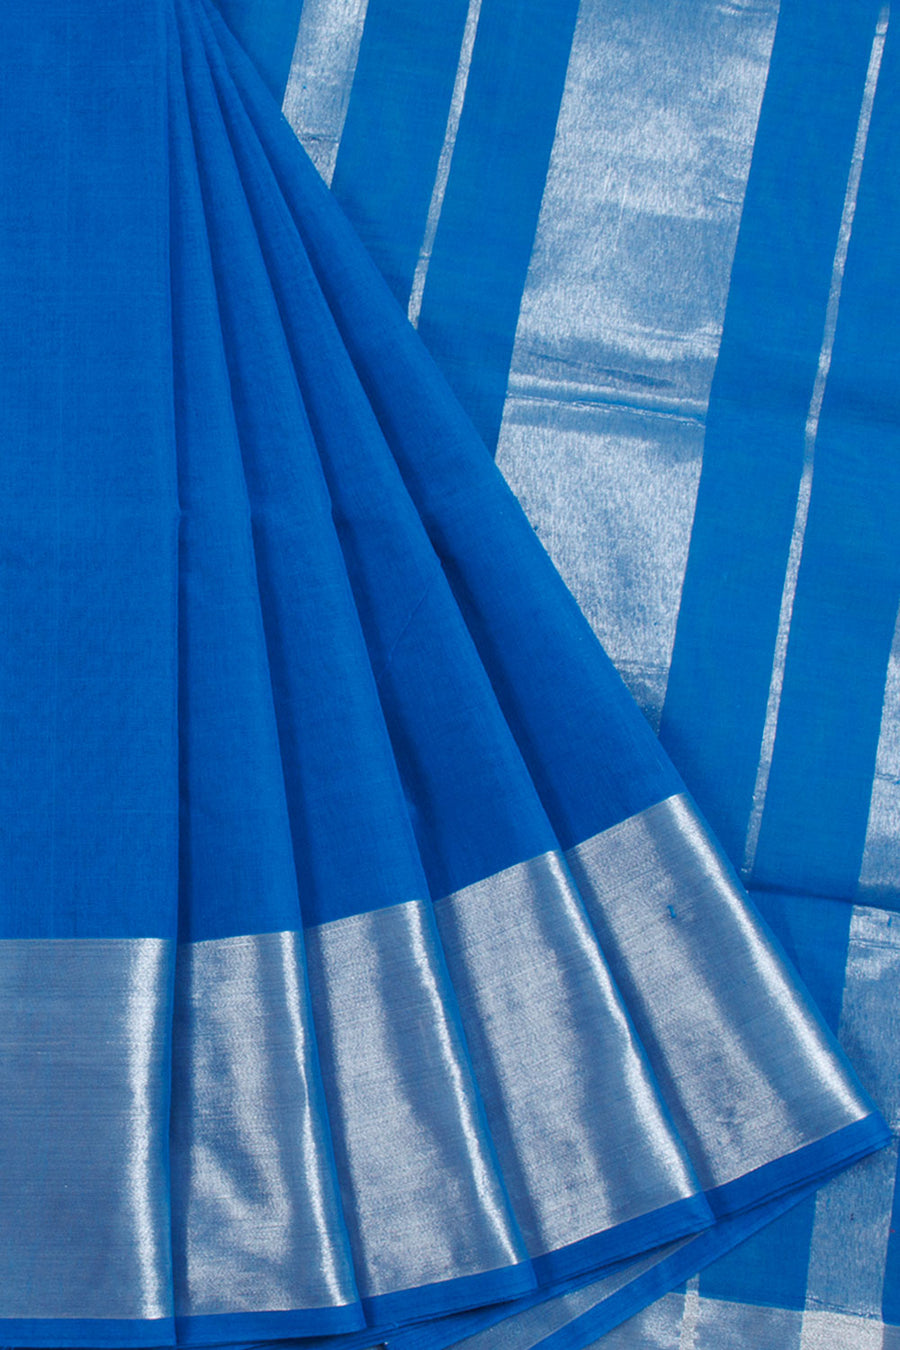 Denim Blue Handwoven Solapur Cotton Saree with Tissue Border and Pallu without Blouse